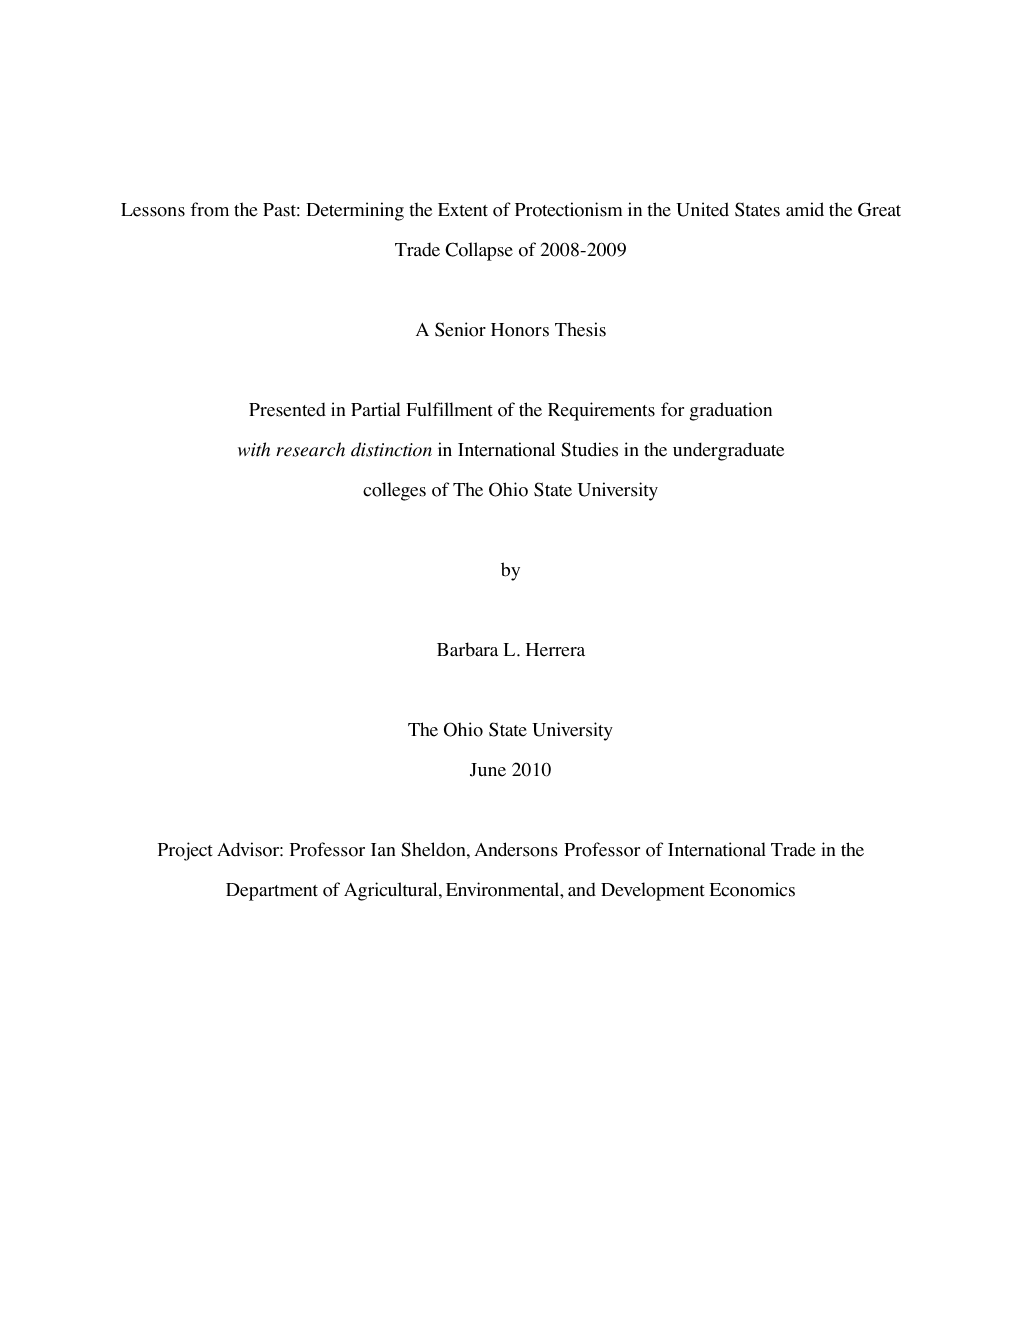 Determining the Extent of Protectionism in the United States Amid the Great Trade Collapse of 2008-2009